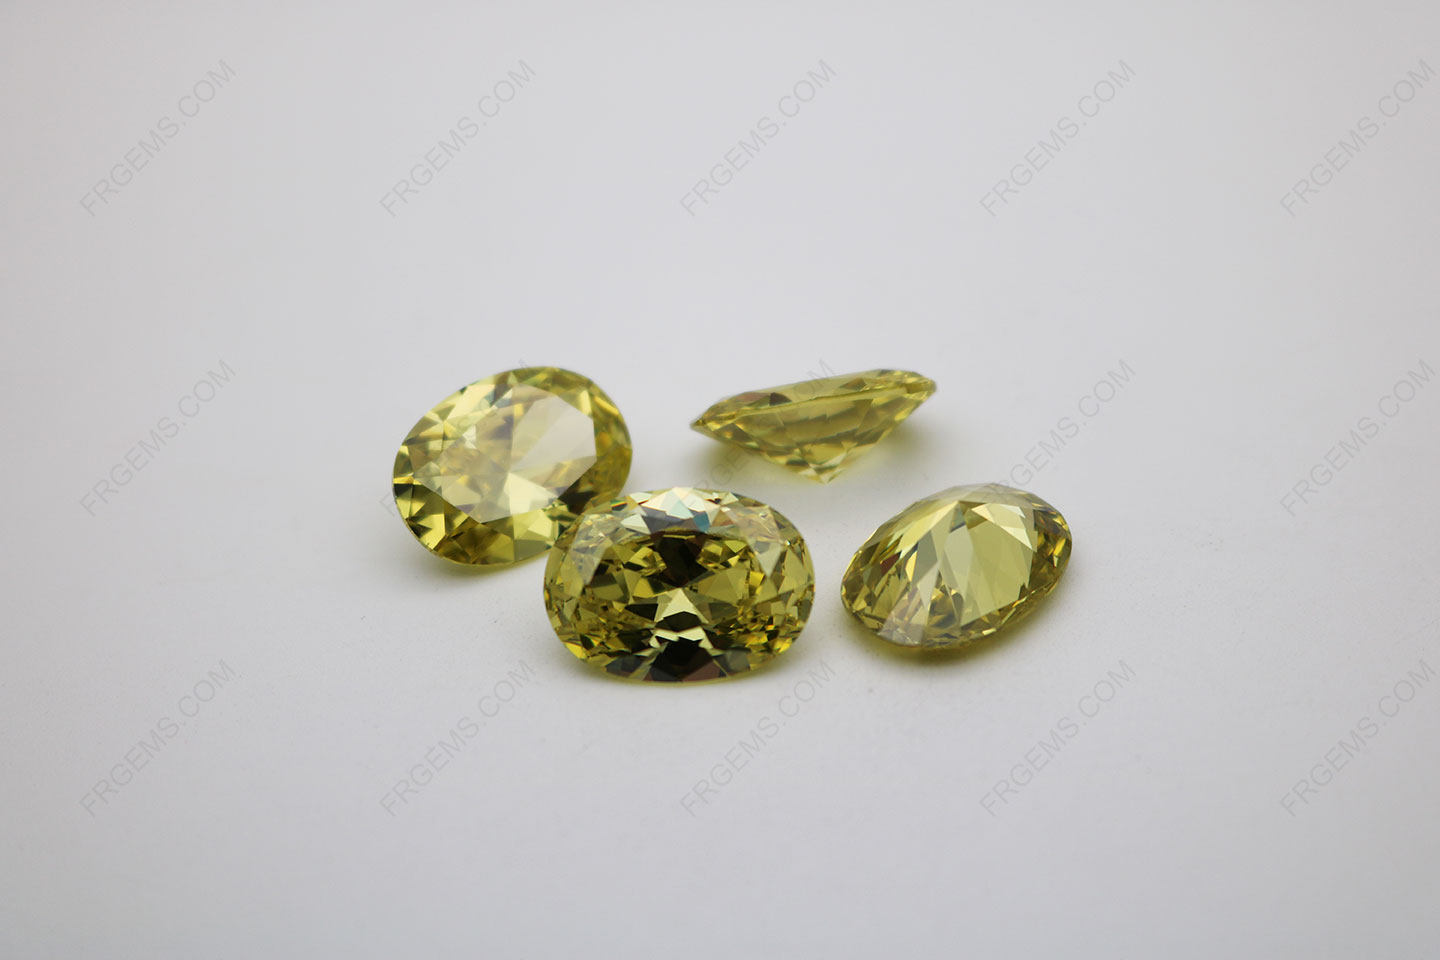 Cubic_Zirconia_Olive_Yellow_Oval_Shape_faceted_Cut_12x8mm_stones_IMG_1218